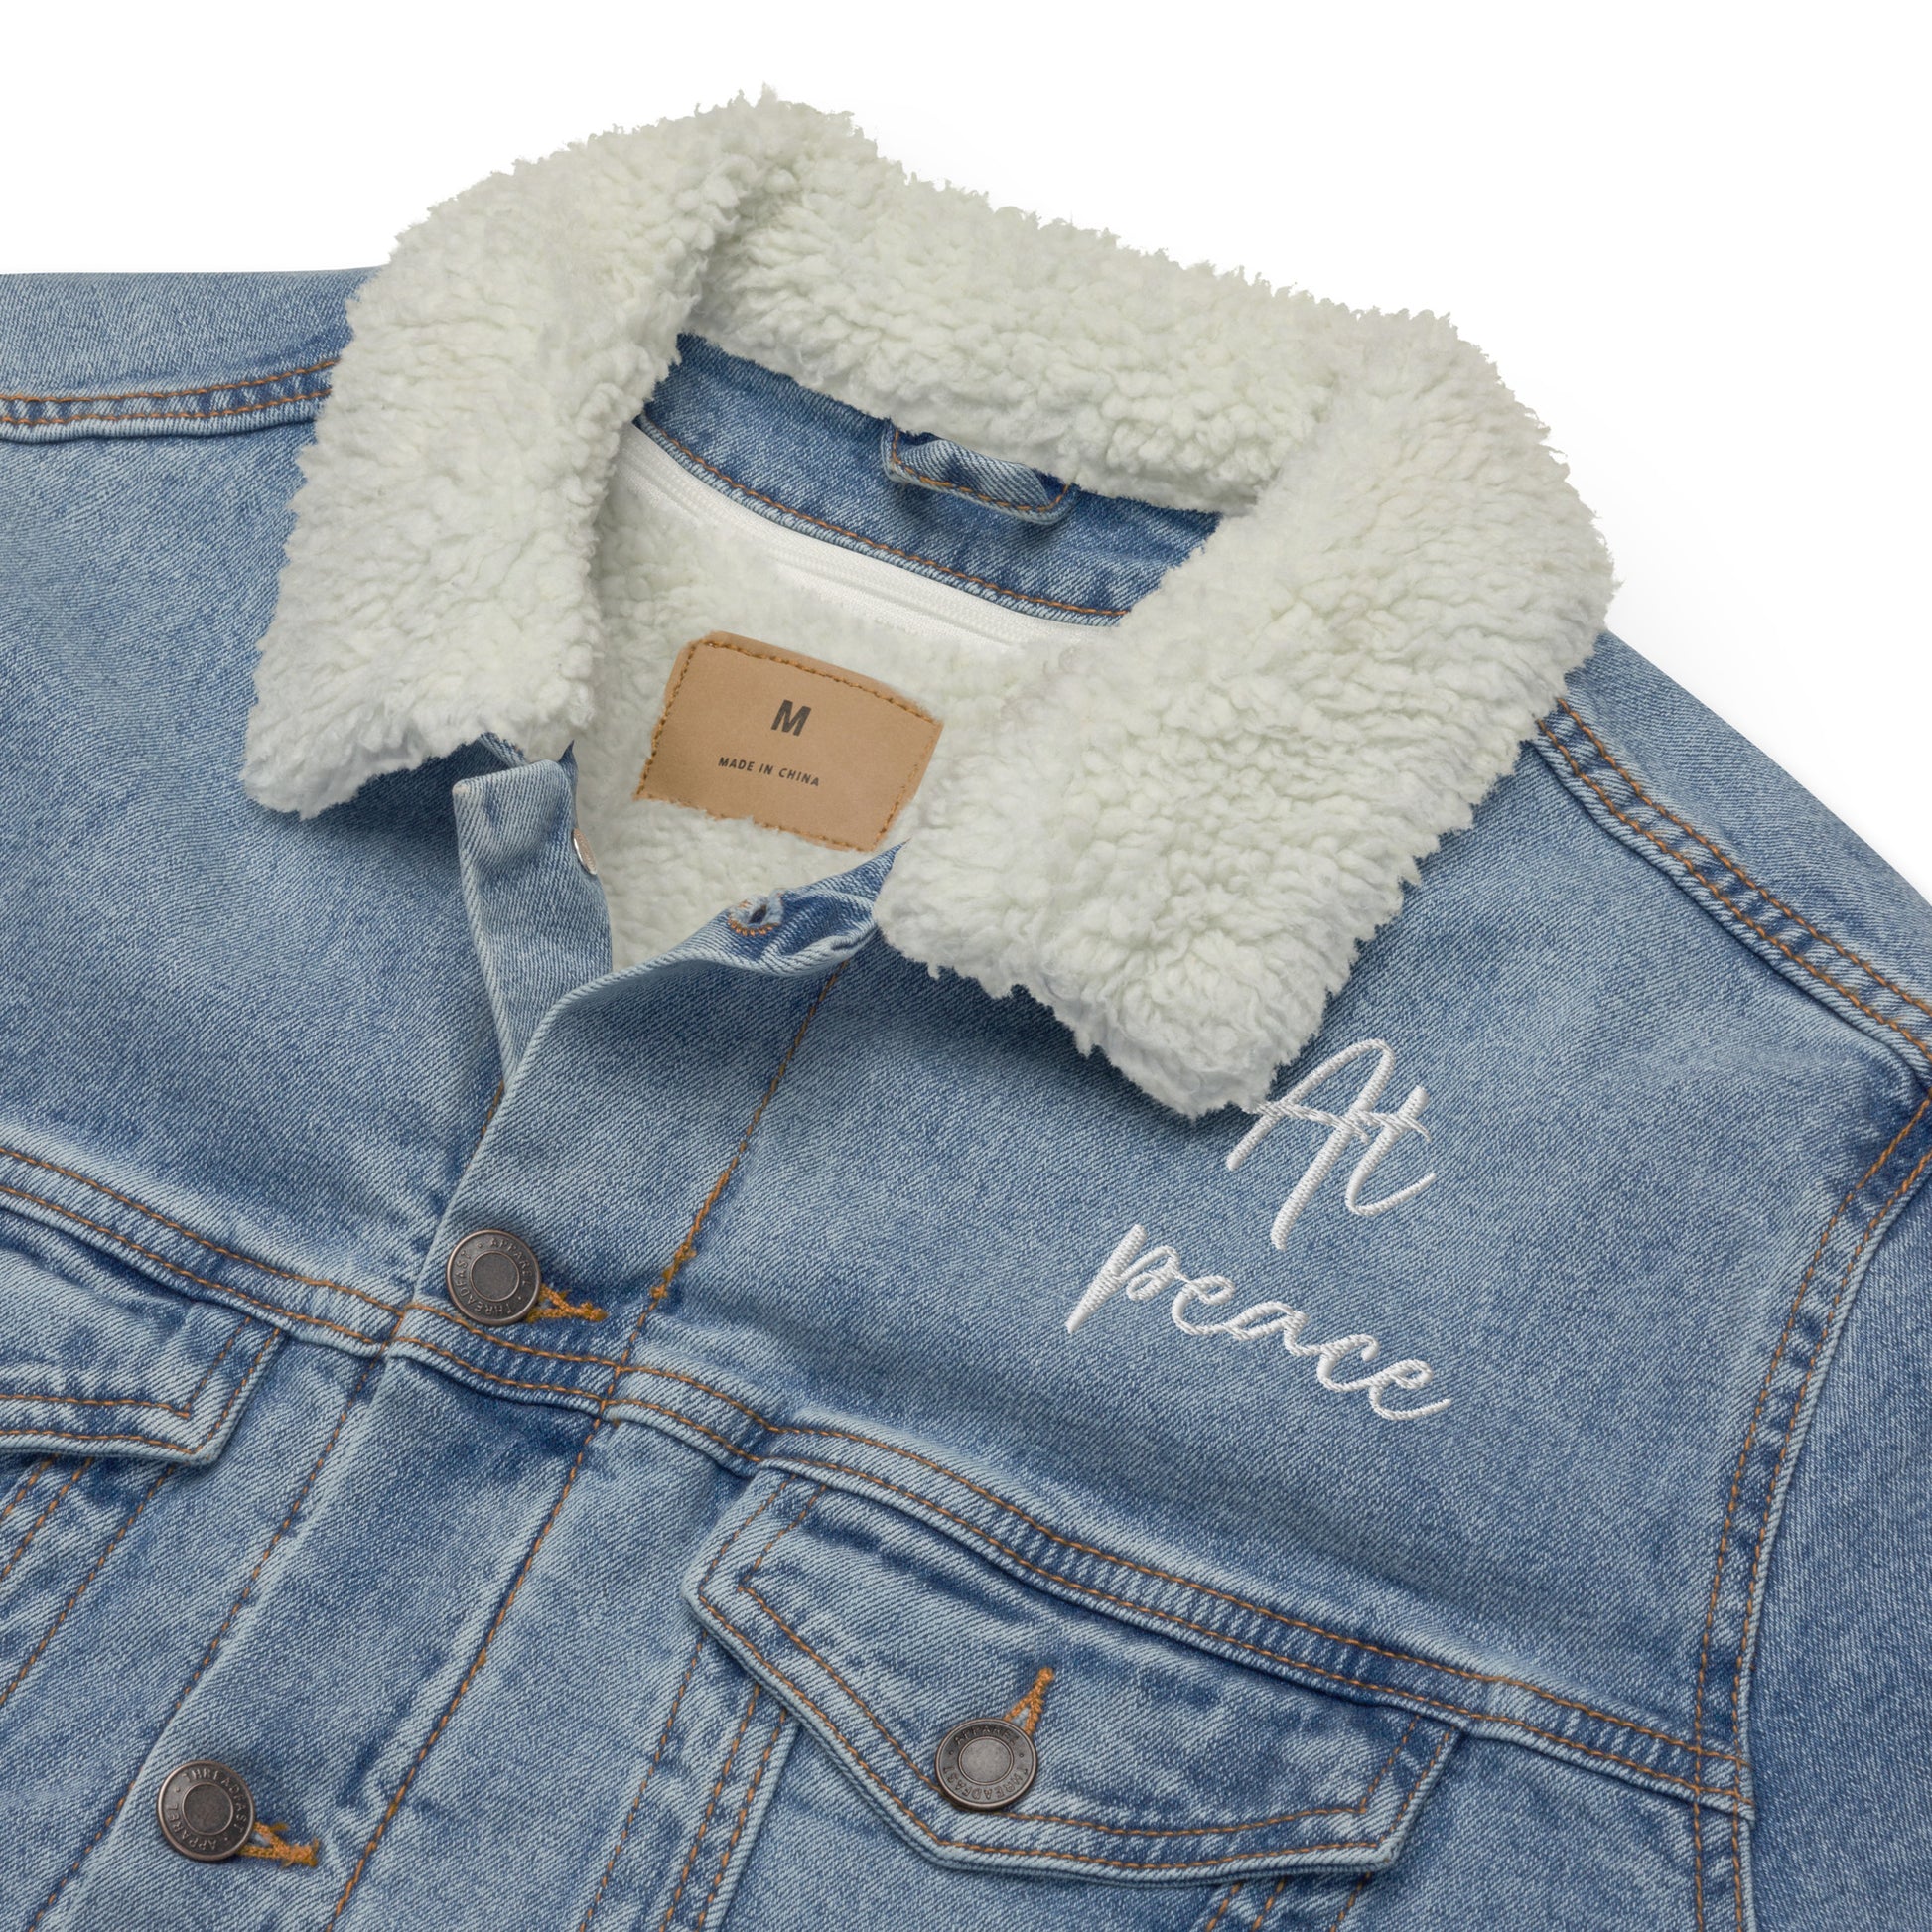 "At peace" with LOVE PEACE JOY (Back) Embroidered Sherpa Blue Denim Jacket (Unisex)